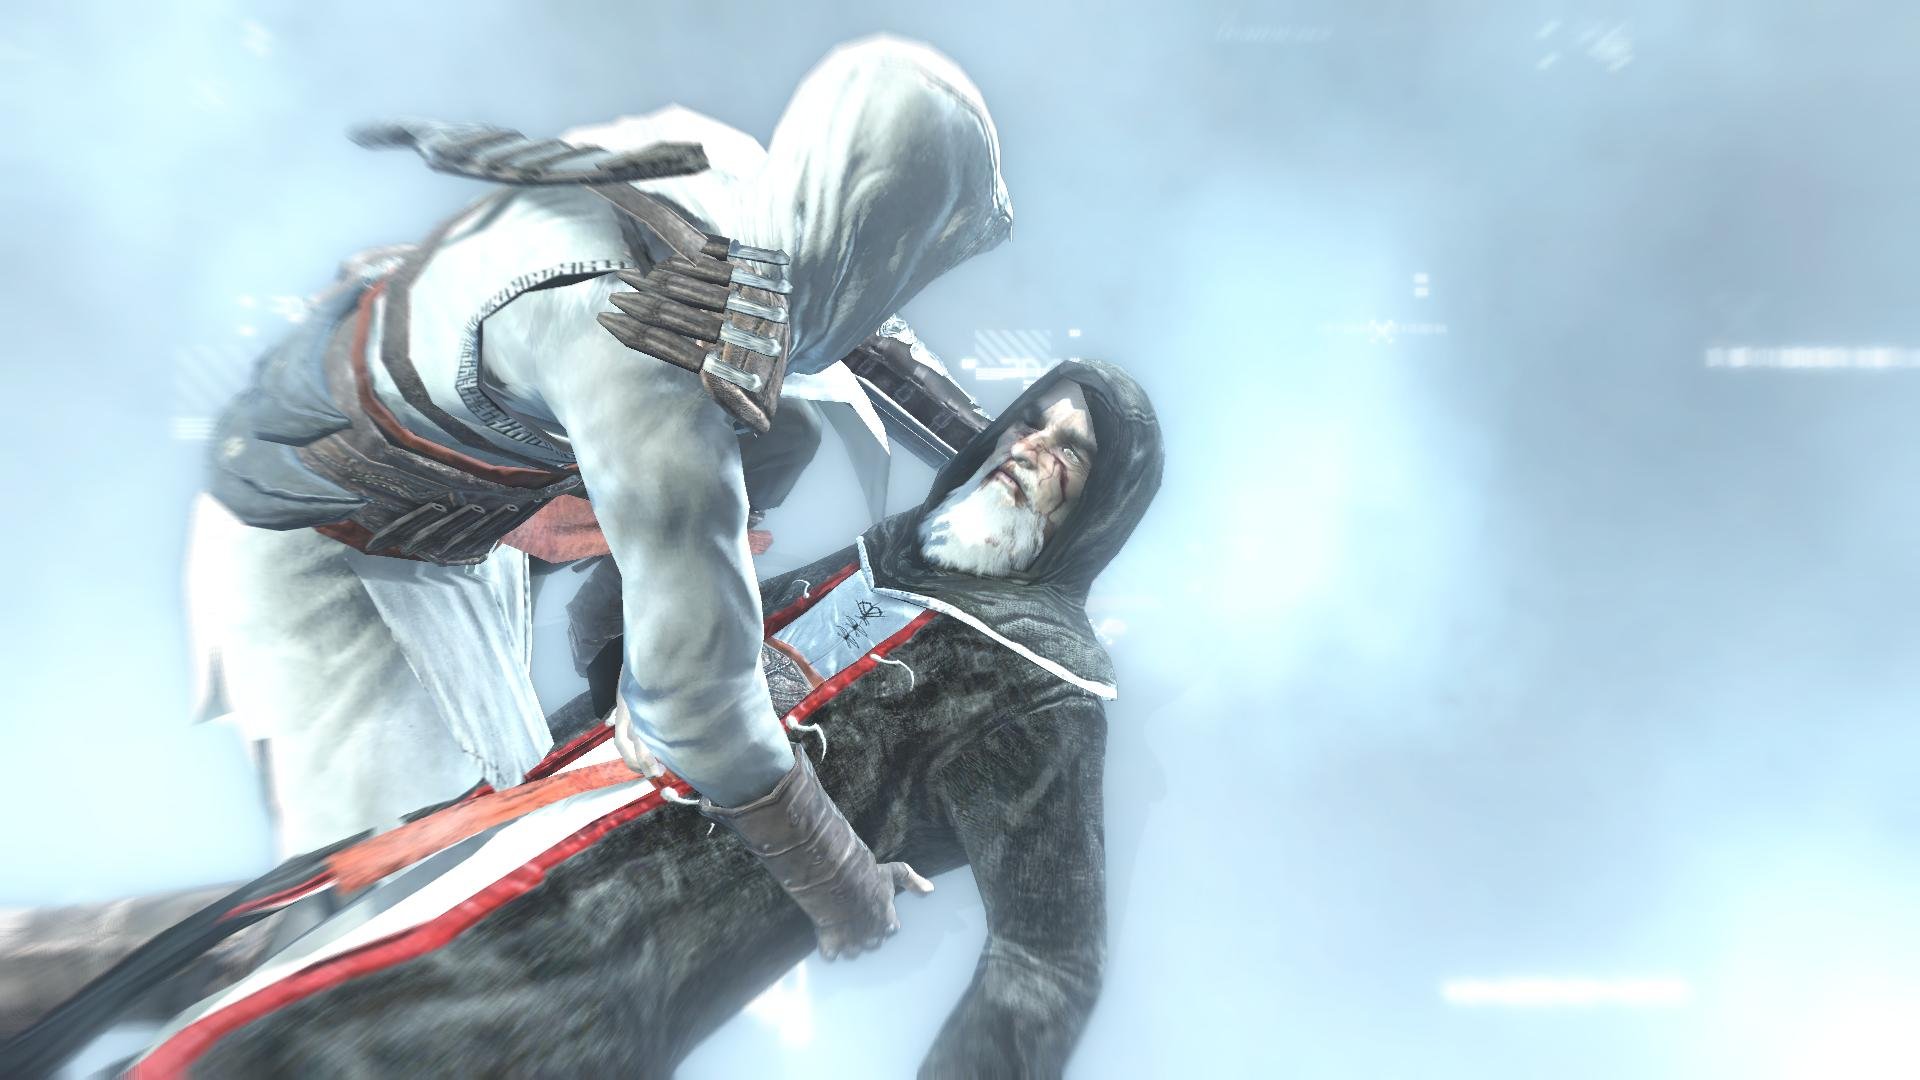 You're Blade is Truly Strong, but your erection is Stronger yet, Altair.